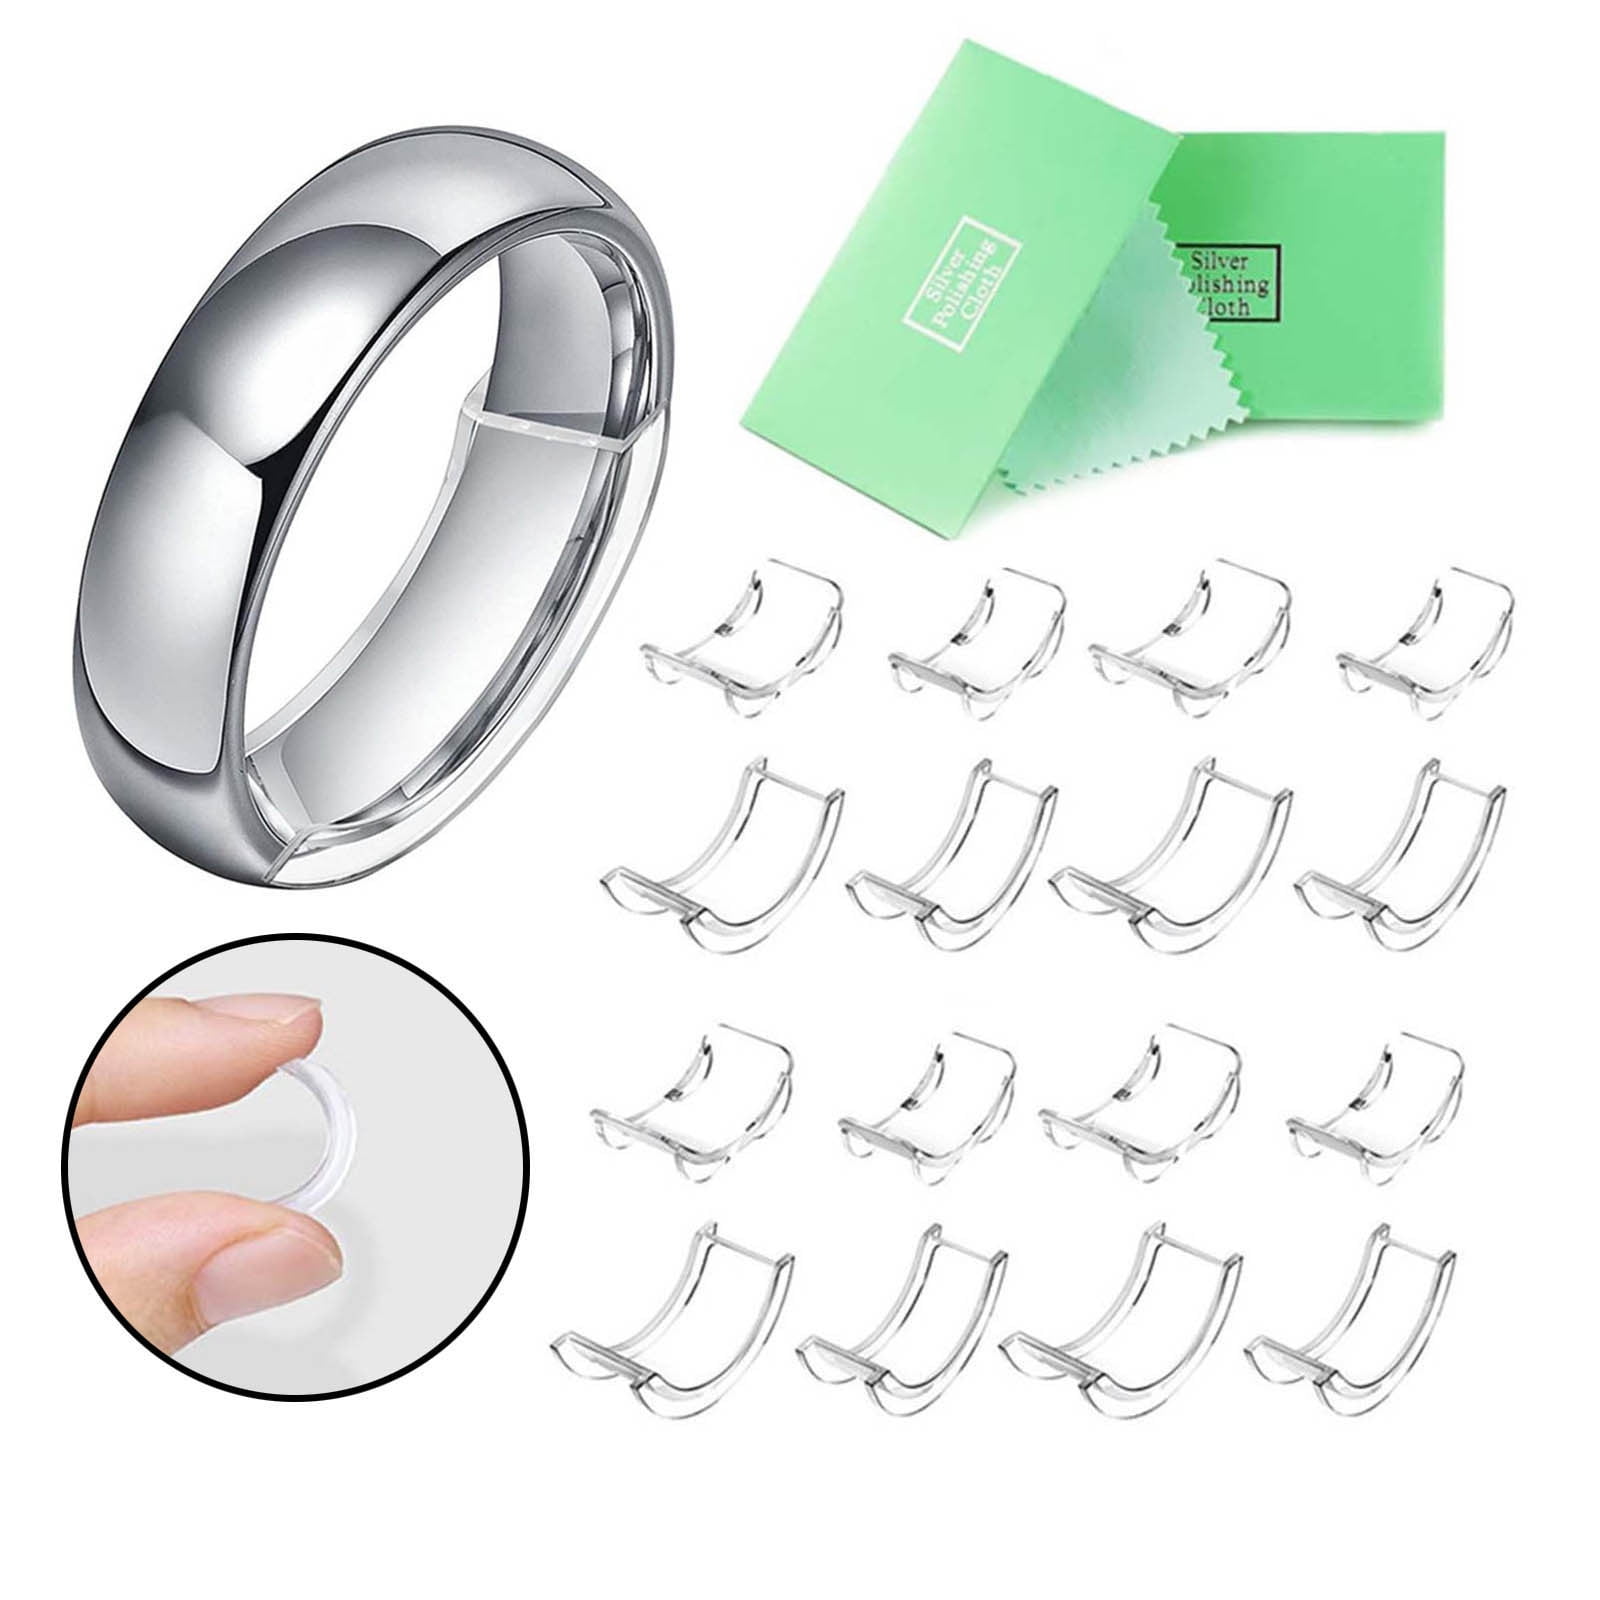 7 Pack Men's Silicone Wedding Band Ring Flex Fit Gym Sport Sizes 9 10 11 12 13 